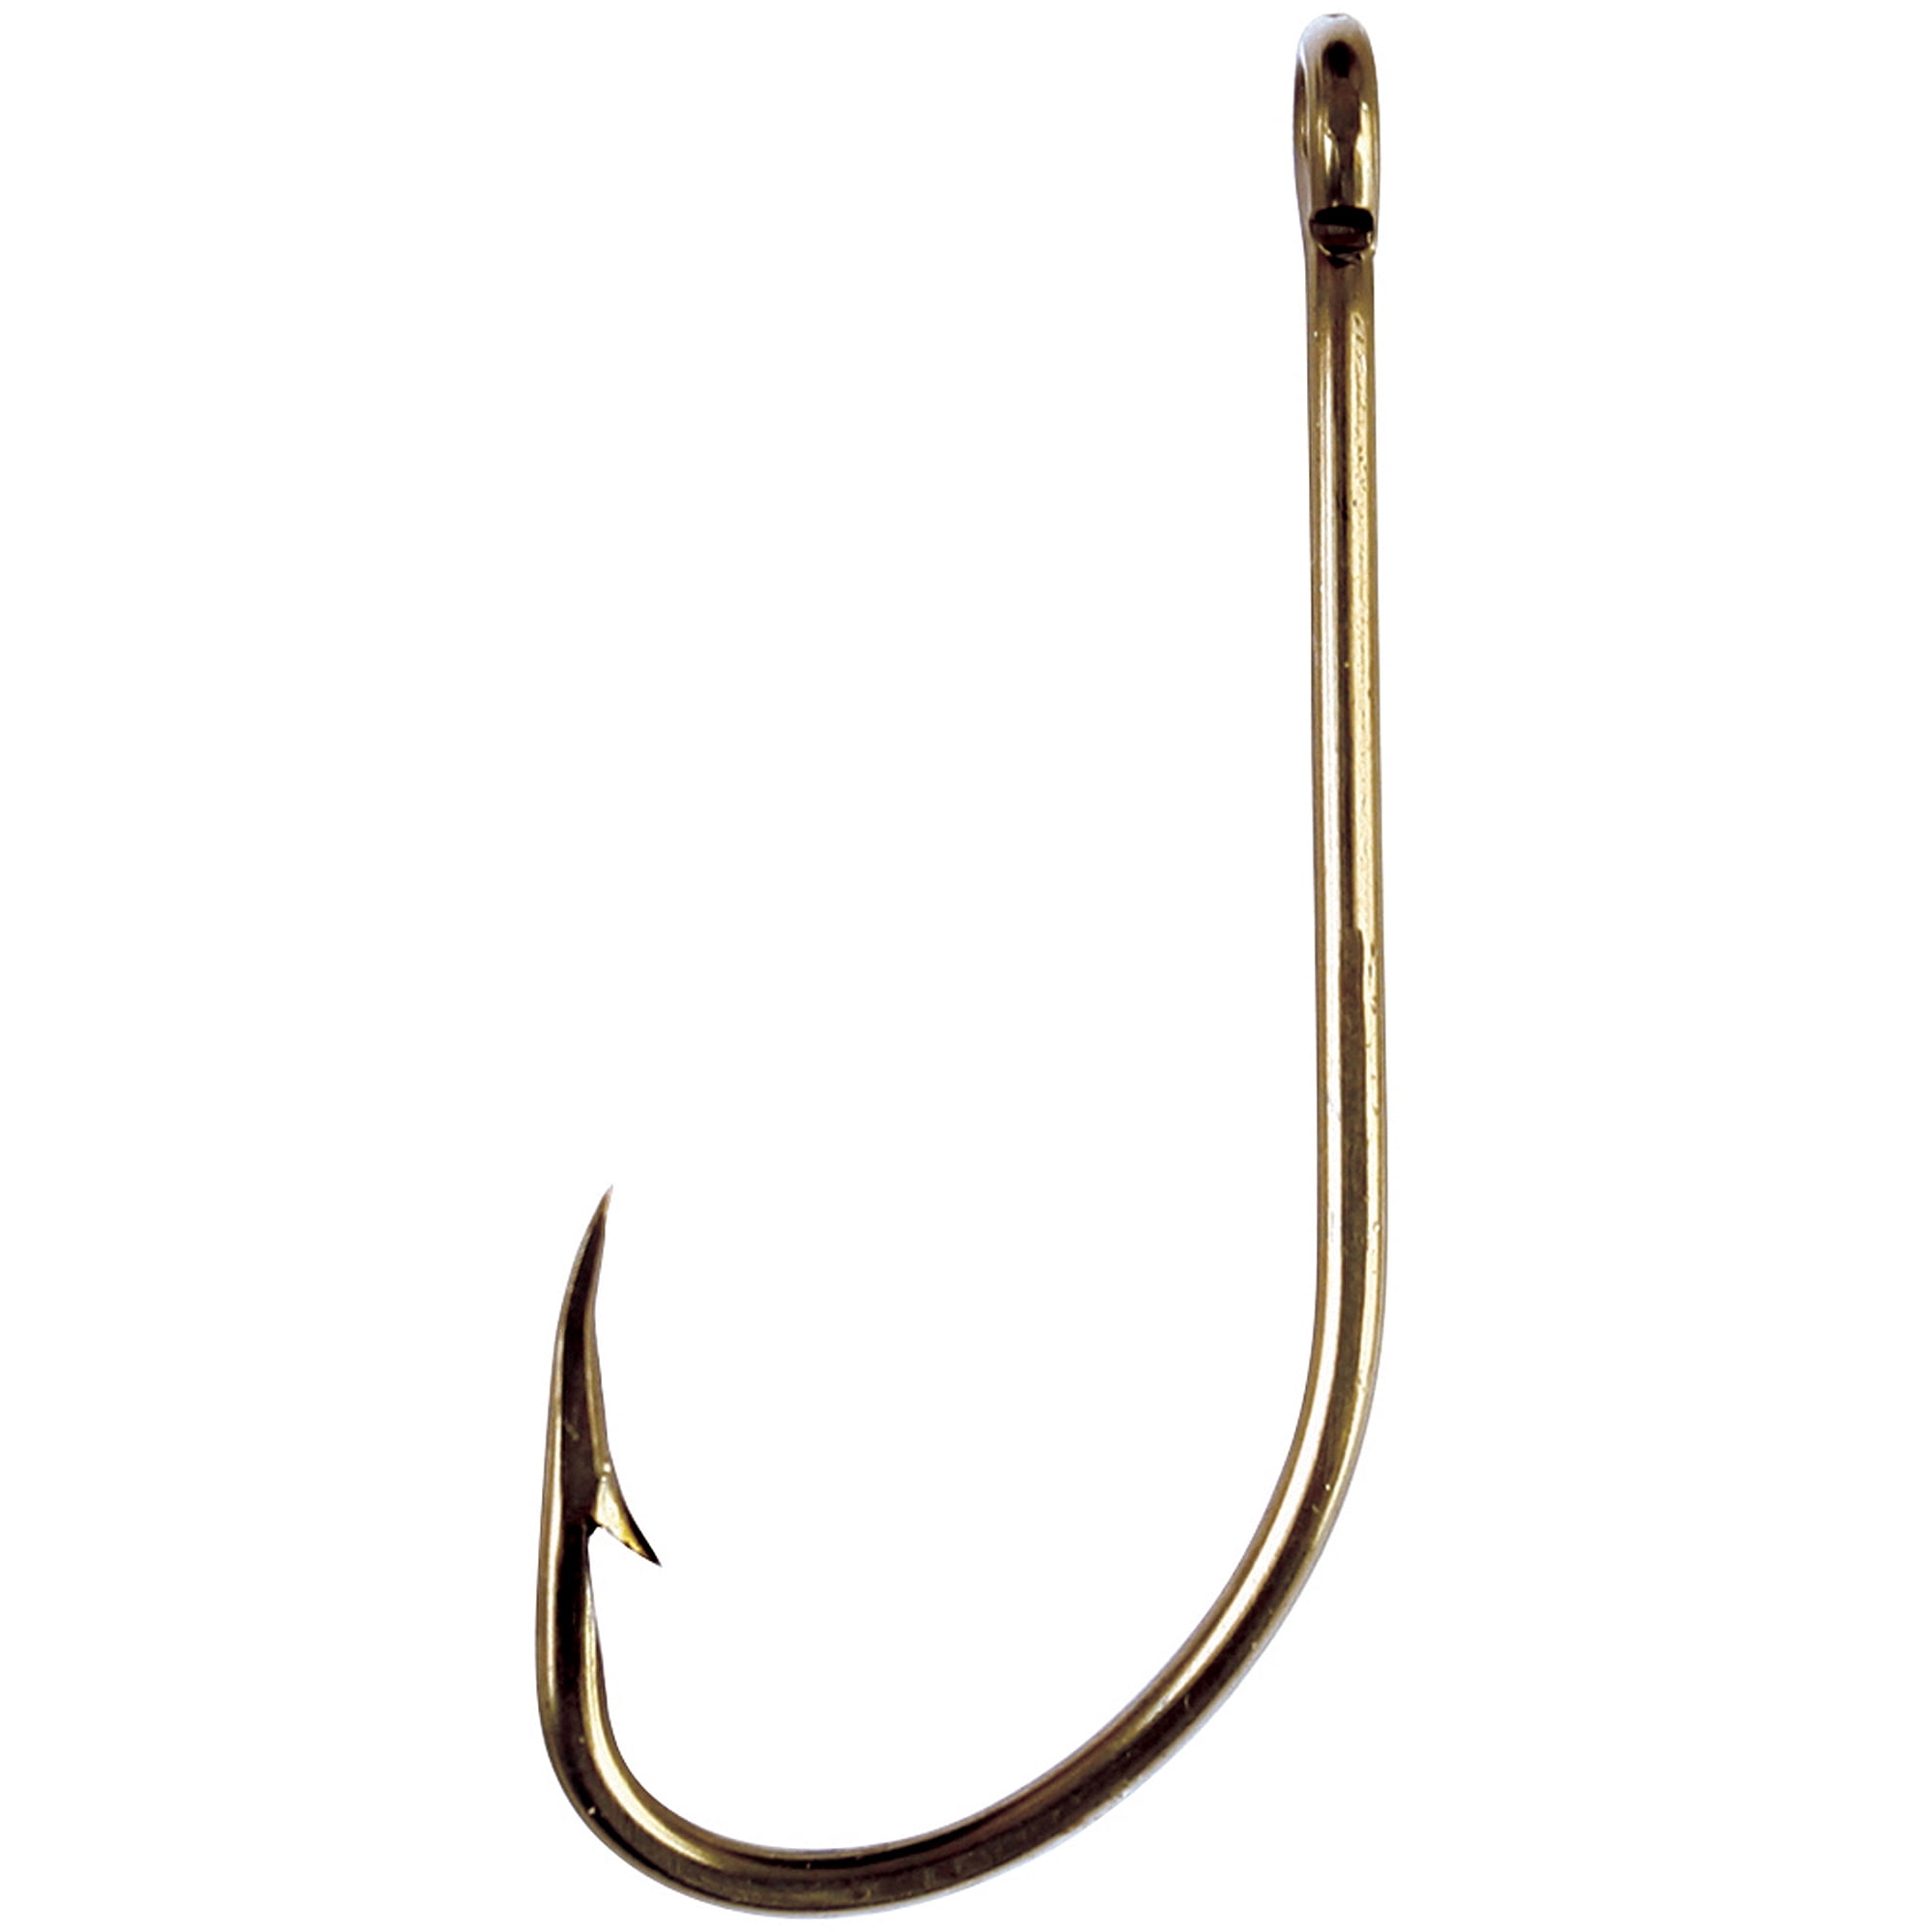 Eagle Claw Plain Shank Size 1 Fishing Hooks 50 Count Pack